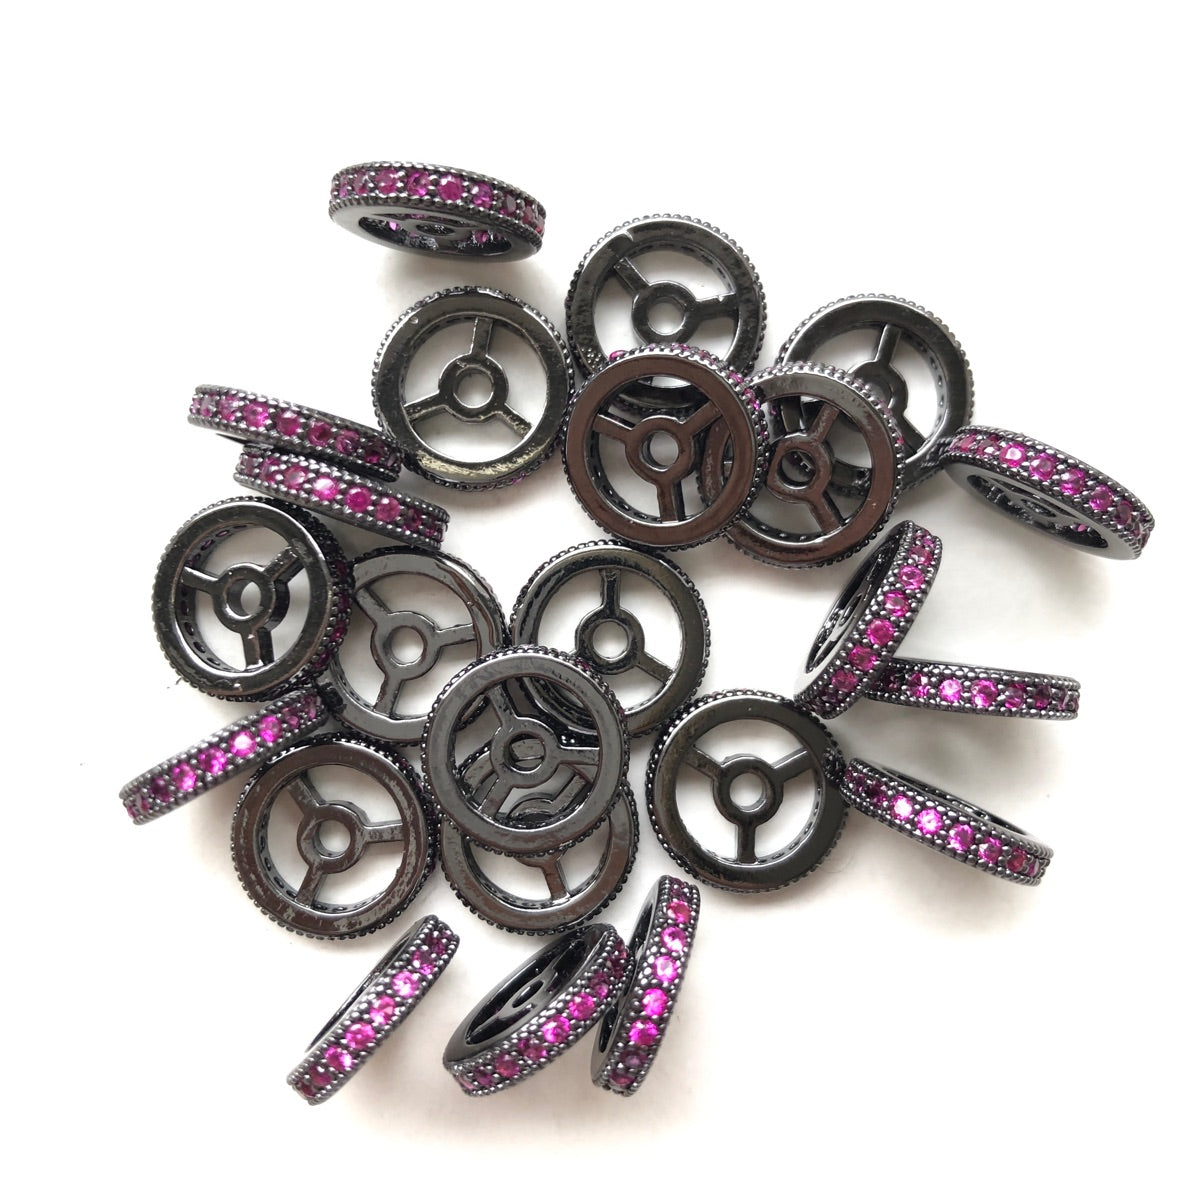 20pcs/lot 9.6/12mm Fuchsia CZ Paved Wheel Rondelle Spacers Black CZ Paved Spacers New Spacers Arrivals Rondelle Beads Charms Beads Beyond